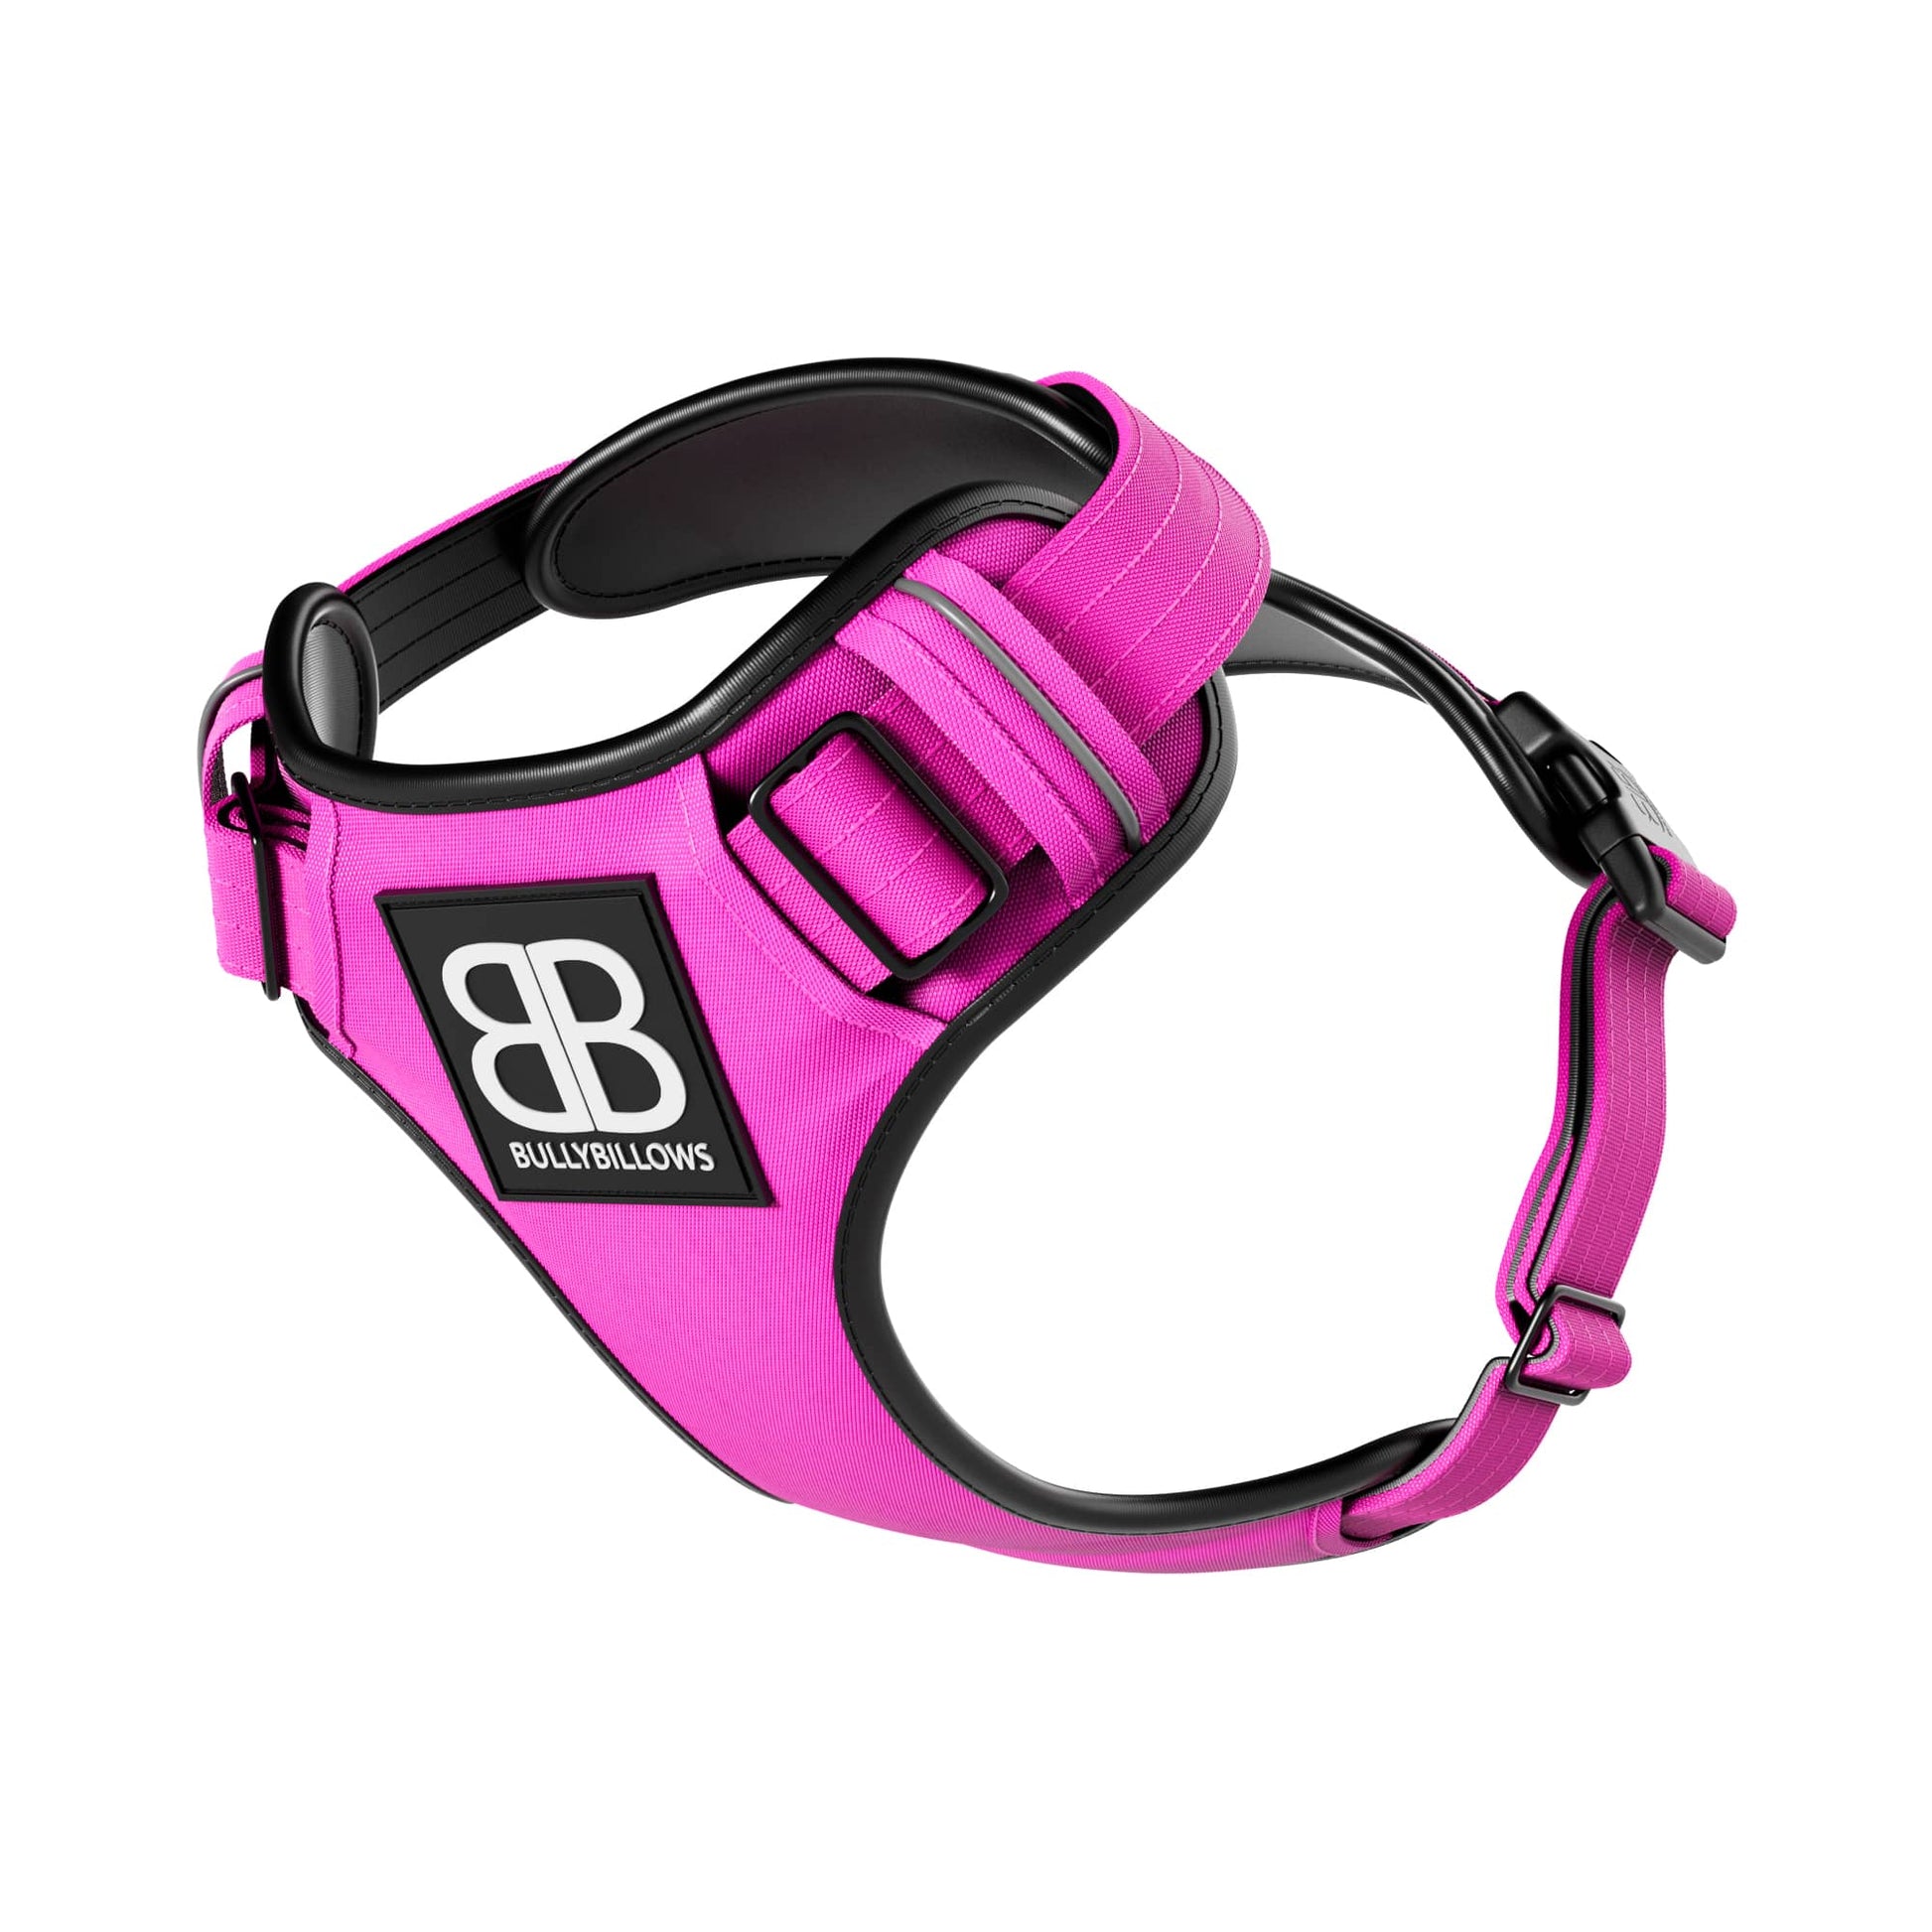 Bullybillows Premium Strong Dog Harness in Magenta Pink